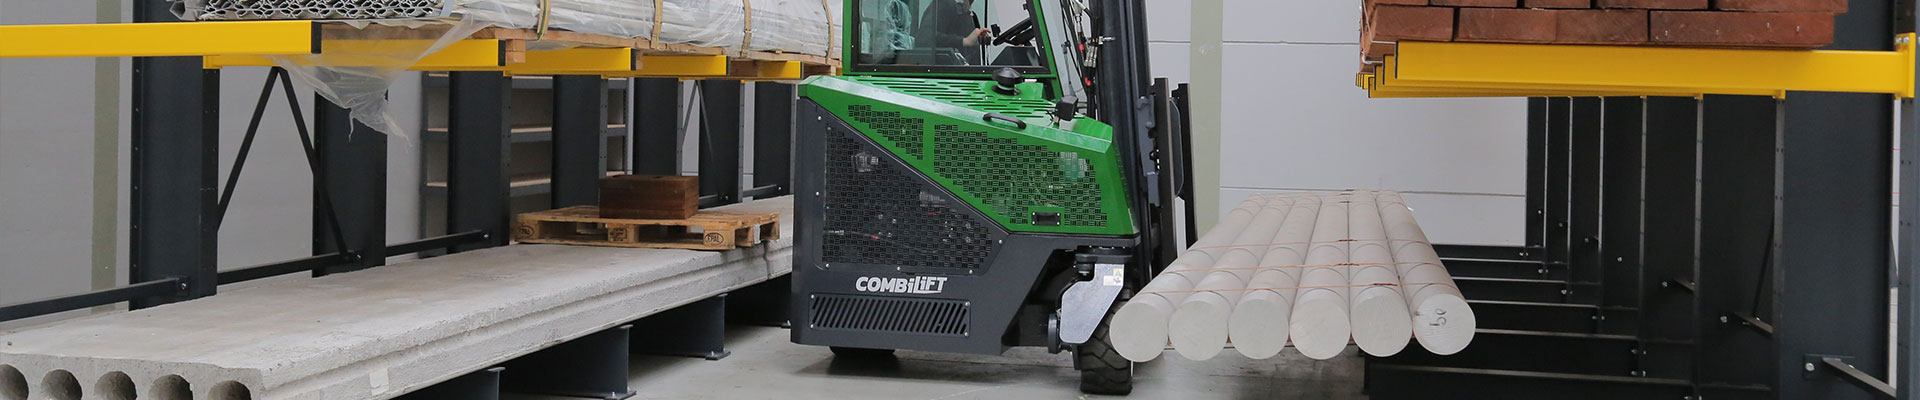 CombiLift forklift working with pipes